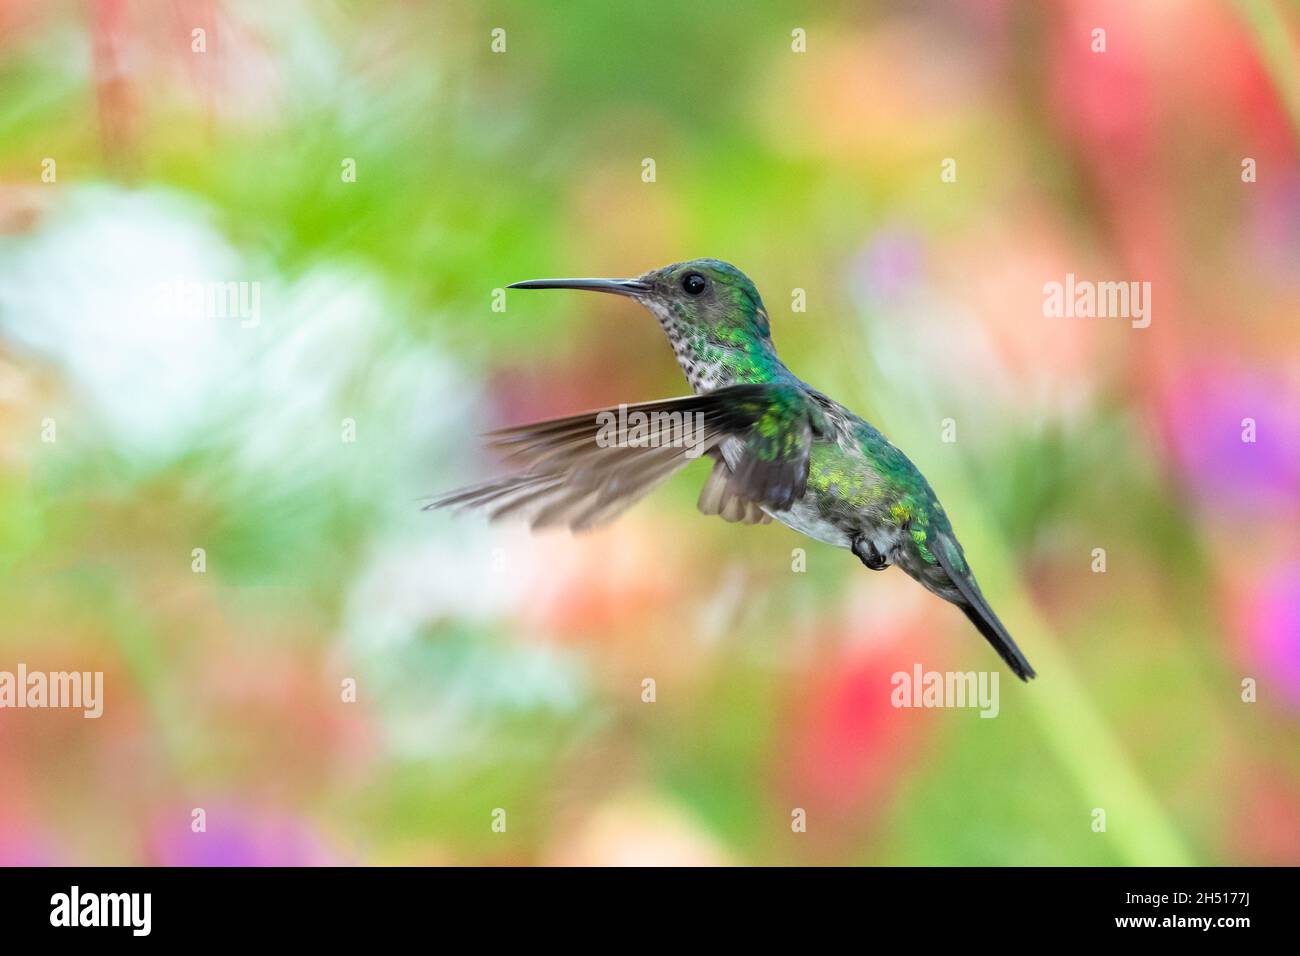 Female Blue-chinned Sapphire hummingbird, Chlorestes notata, hovering with a blurred floral background. Stock Photo